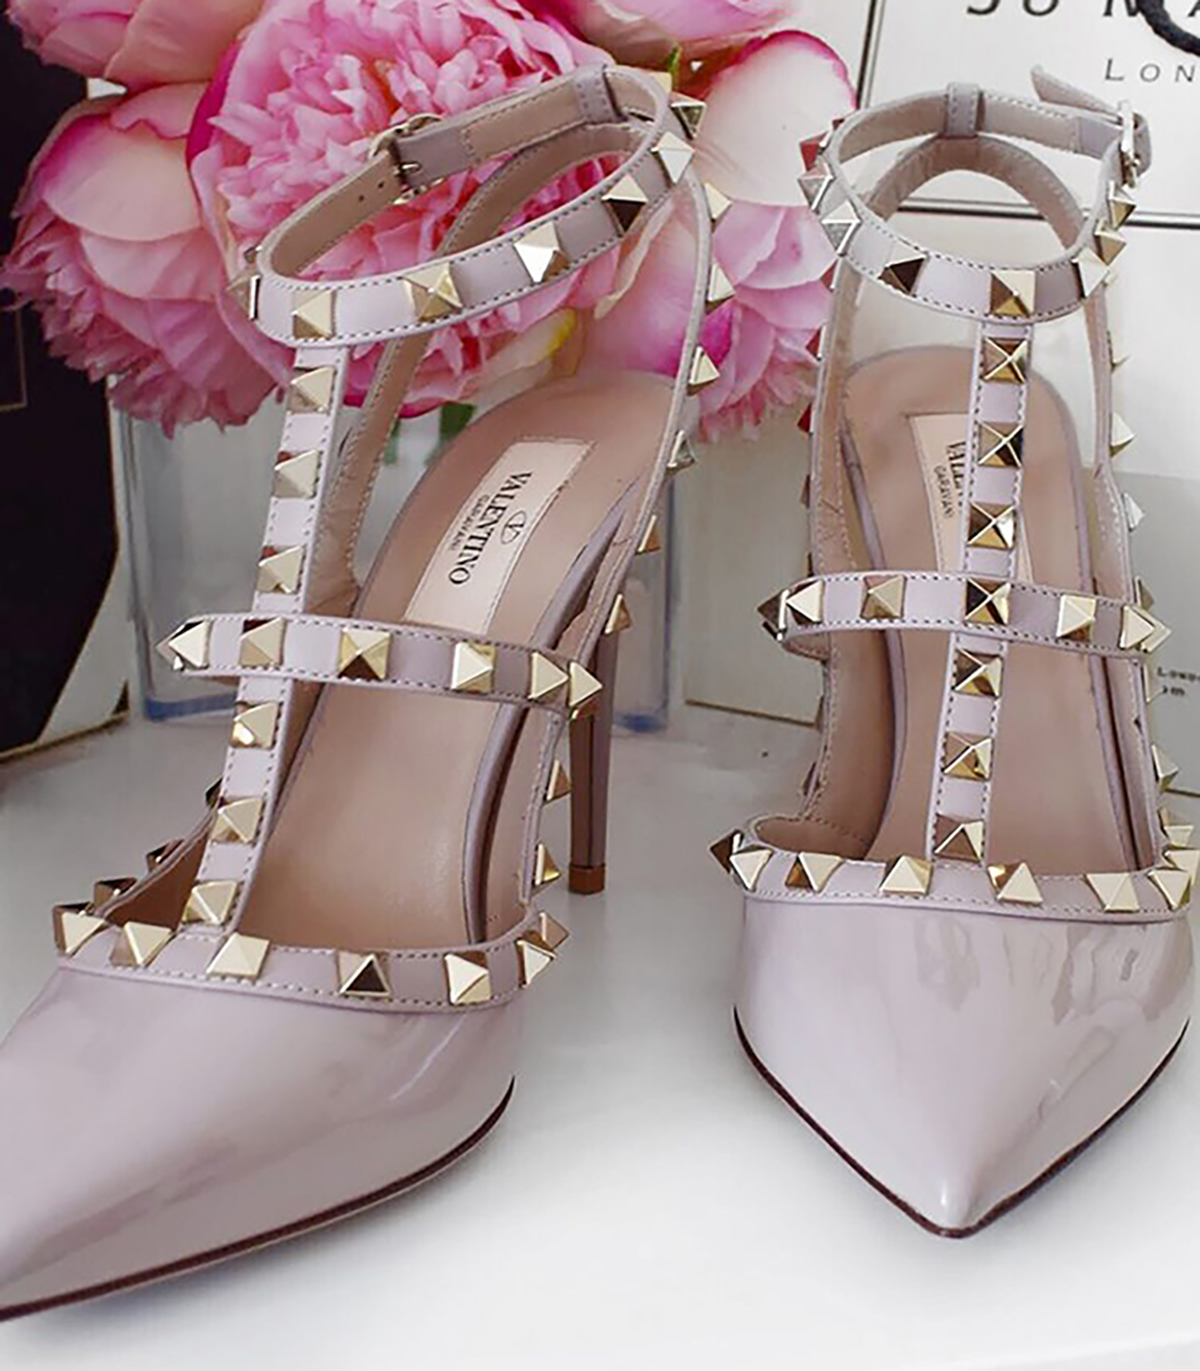 Review of Valentino Rockstud Heels, Pumps and Sandals